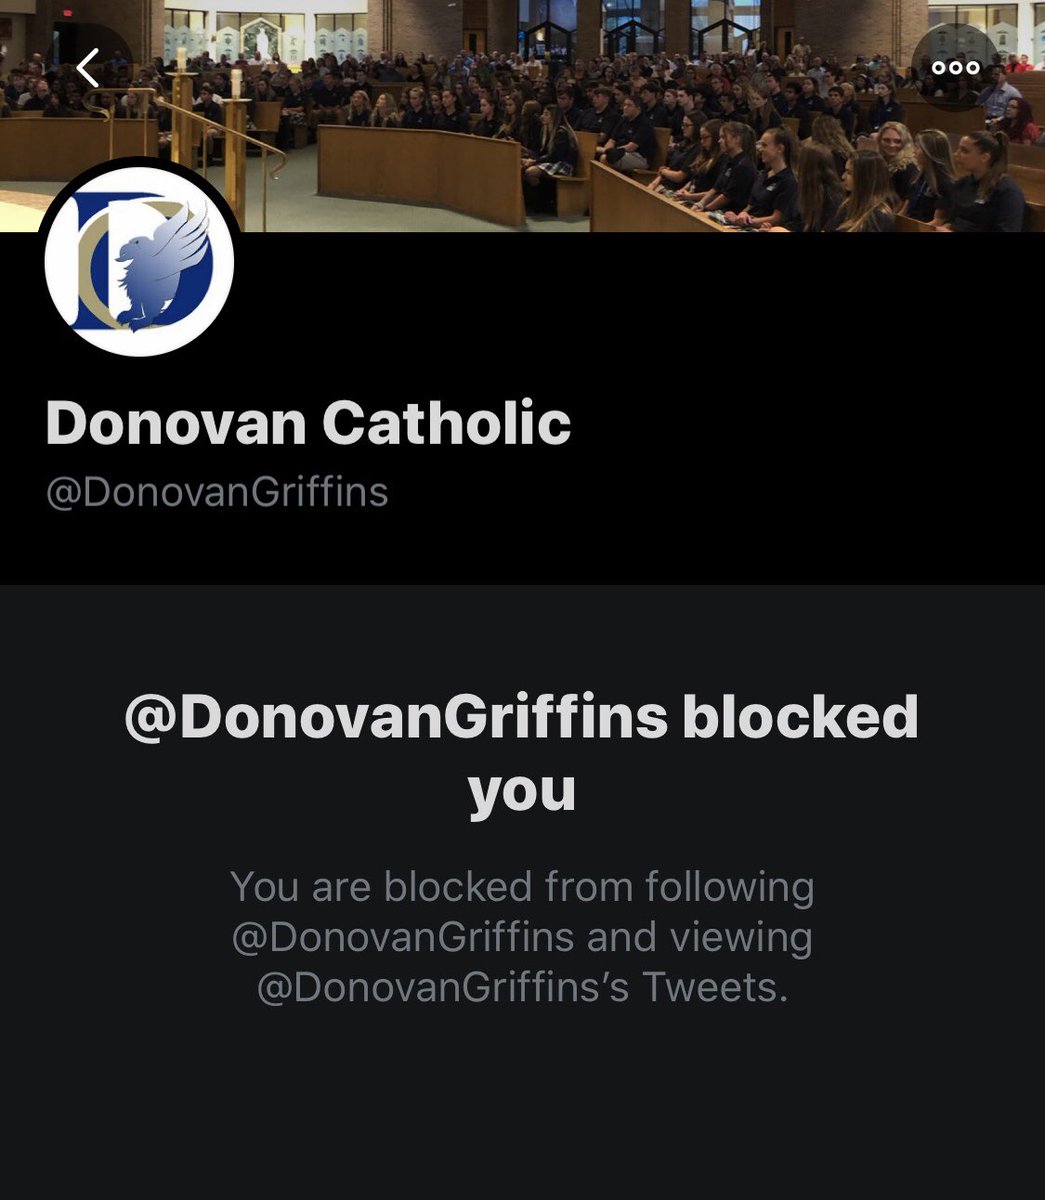 Rather than confront racism, Donovan Catholic and faculty continue to block alumni who are speaking out and engaging in anti-racist work.  @DonovanGriffins